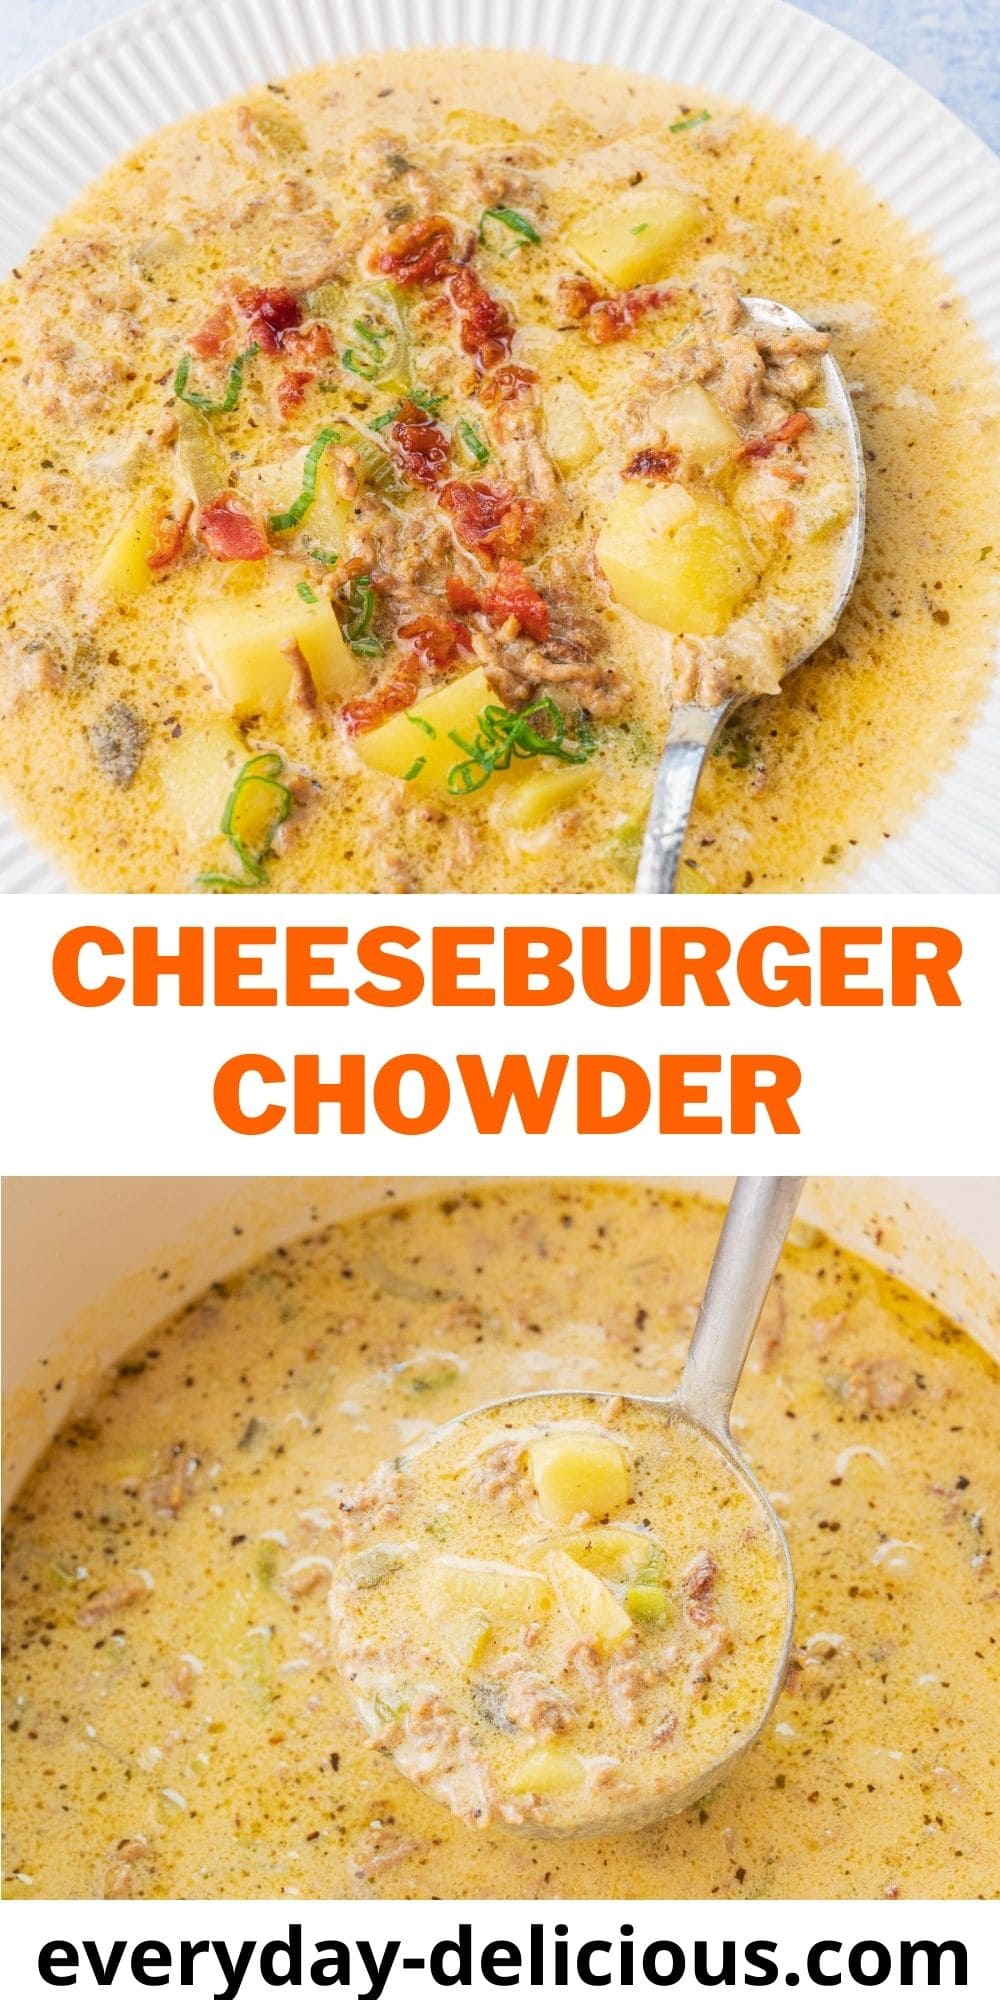 Cheeseburger Chowder - Everyday Delicious